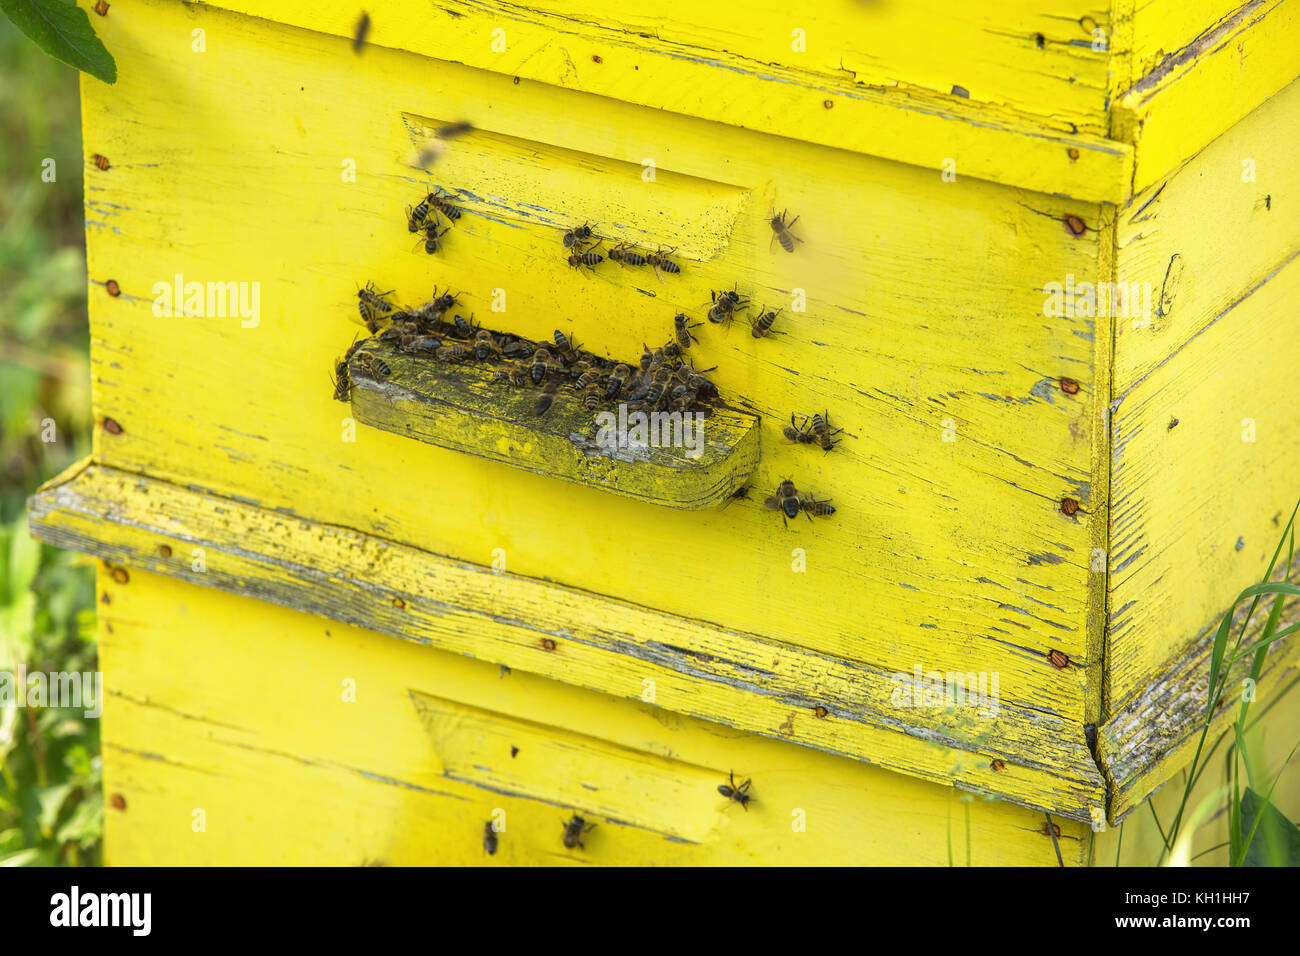 Honey bees swarming on a hive Stock Photo